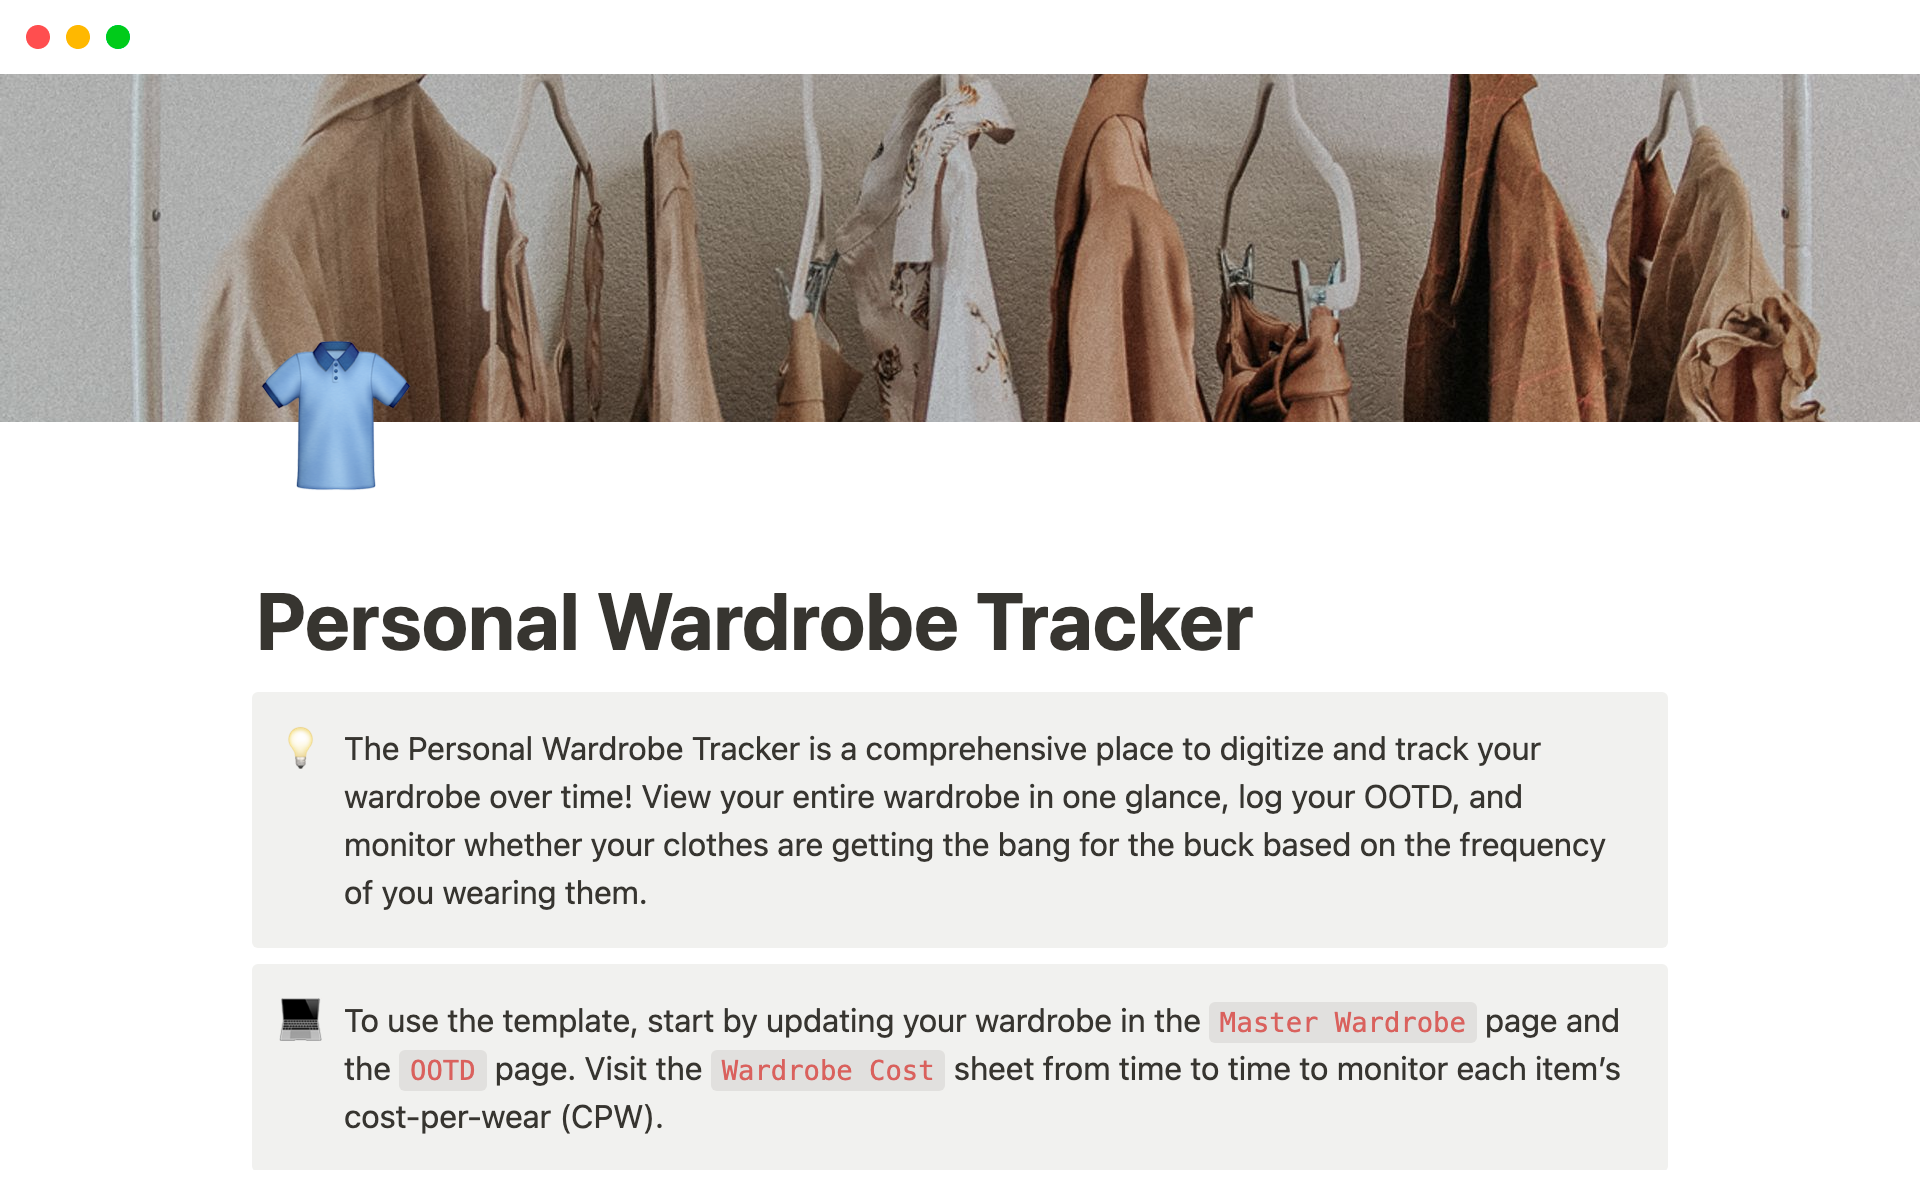 This Notion template allows you to digitize your entire wardrobe, track how much each item is worth based on your wear, track your OOTDs, as well as watching out for new cute outfits!